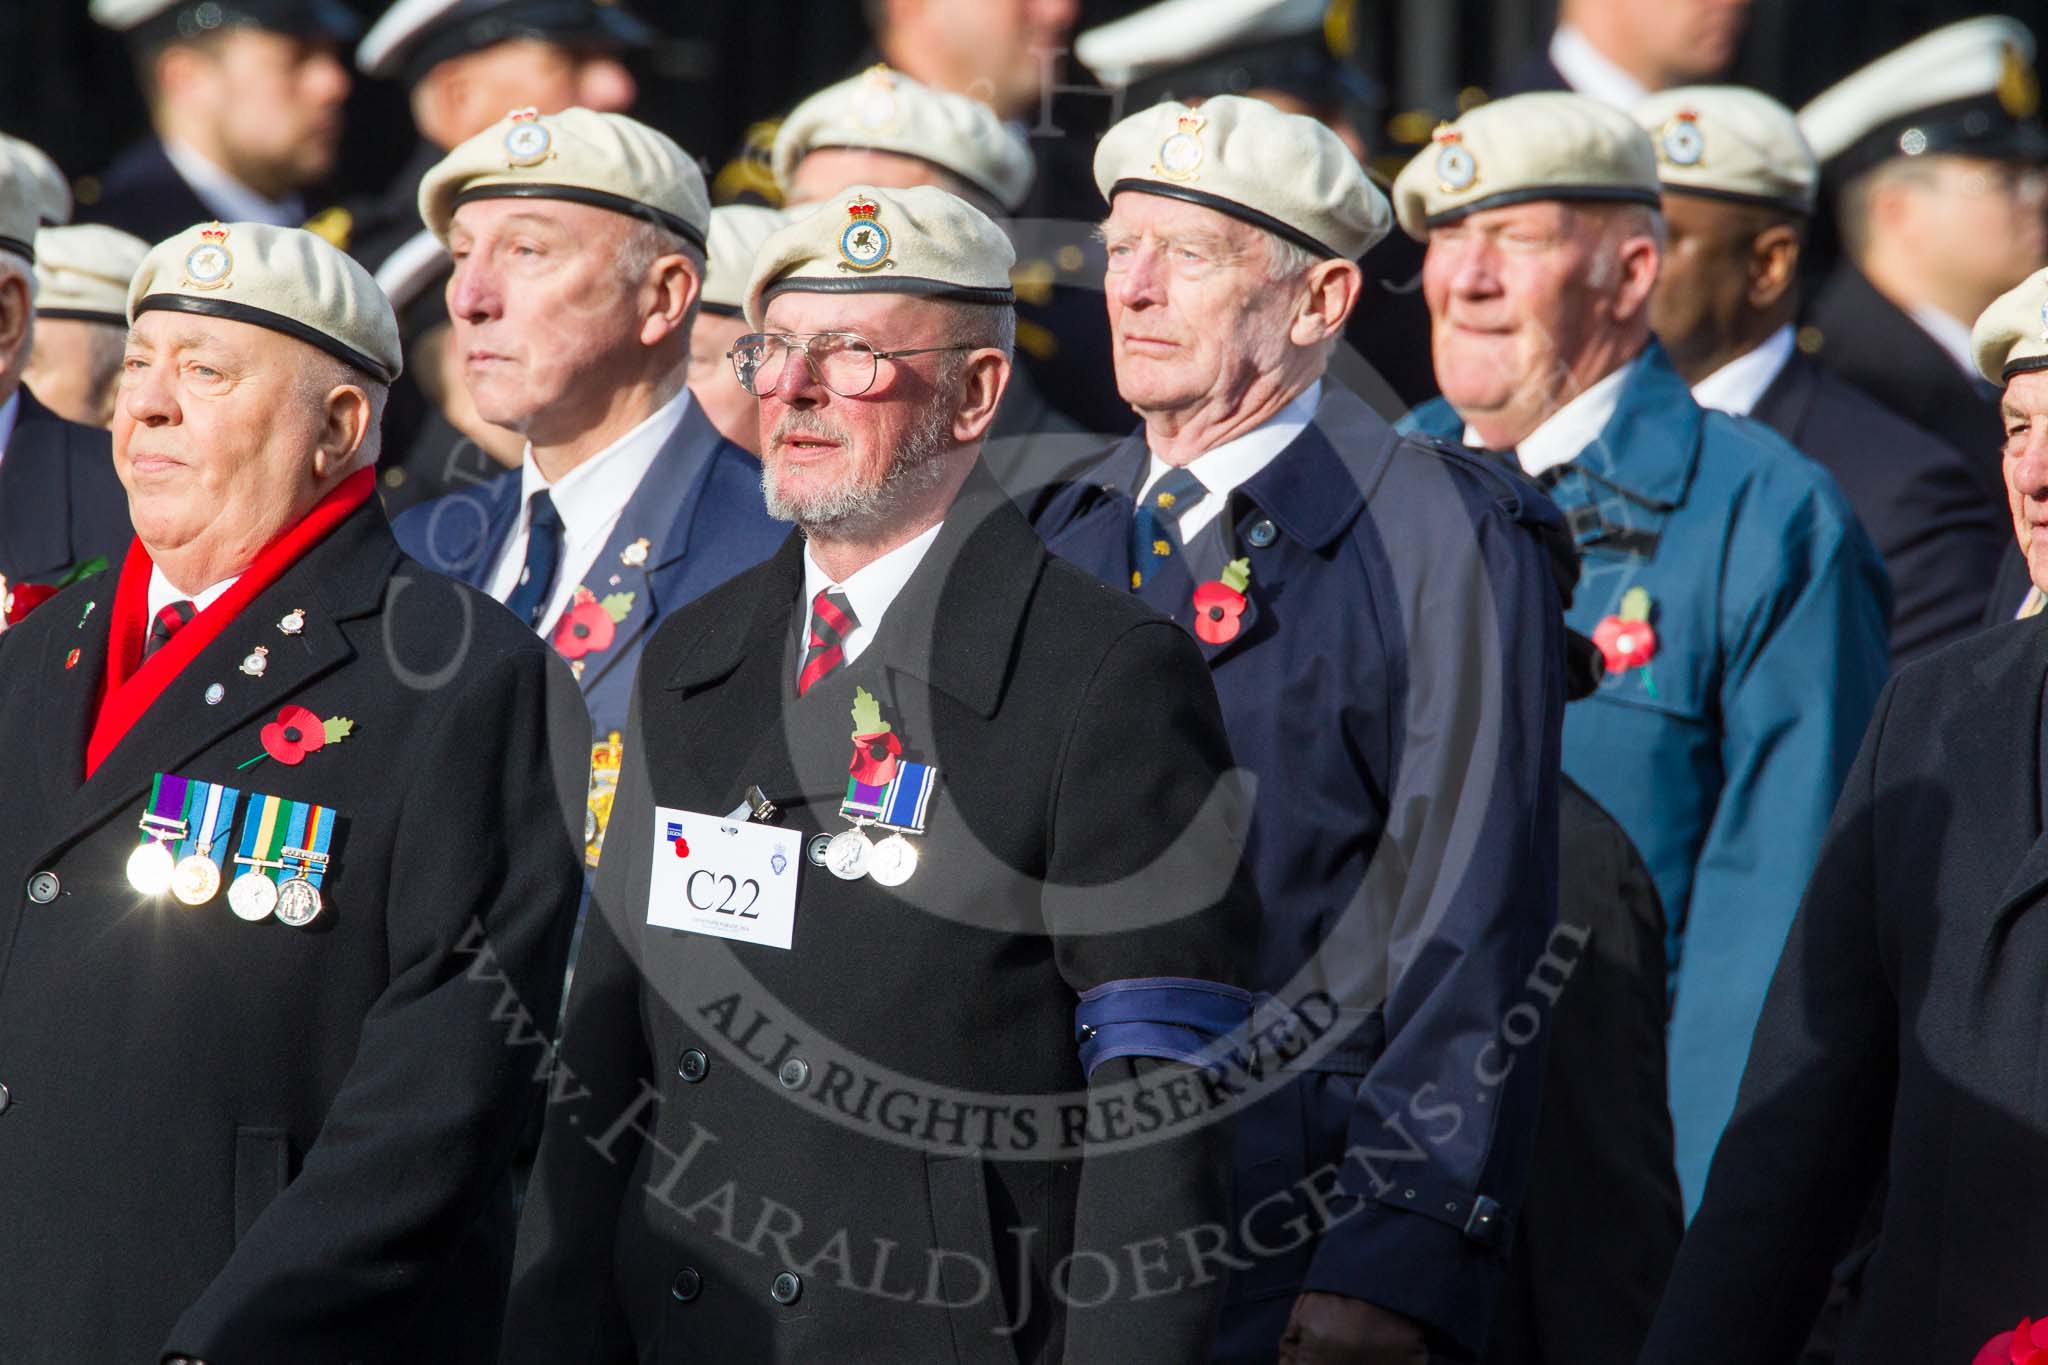 Remembrance Sunday at the Cenotaph in London 2014: Group C22 - Royal Air Force Police Association.
Press stand opposite the Foreign Office building, Whitehall, London SW1,
London,
Greater London,
United Kingdom,
on 09 November 2014 at 11:41, image #186